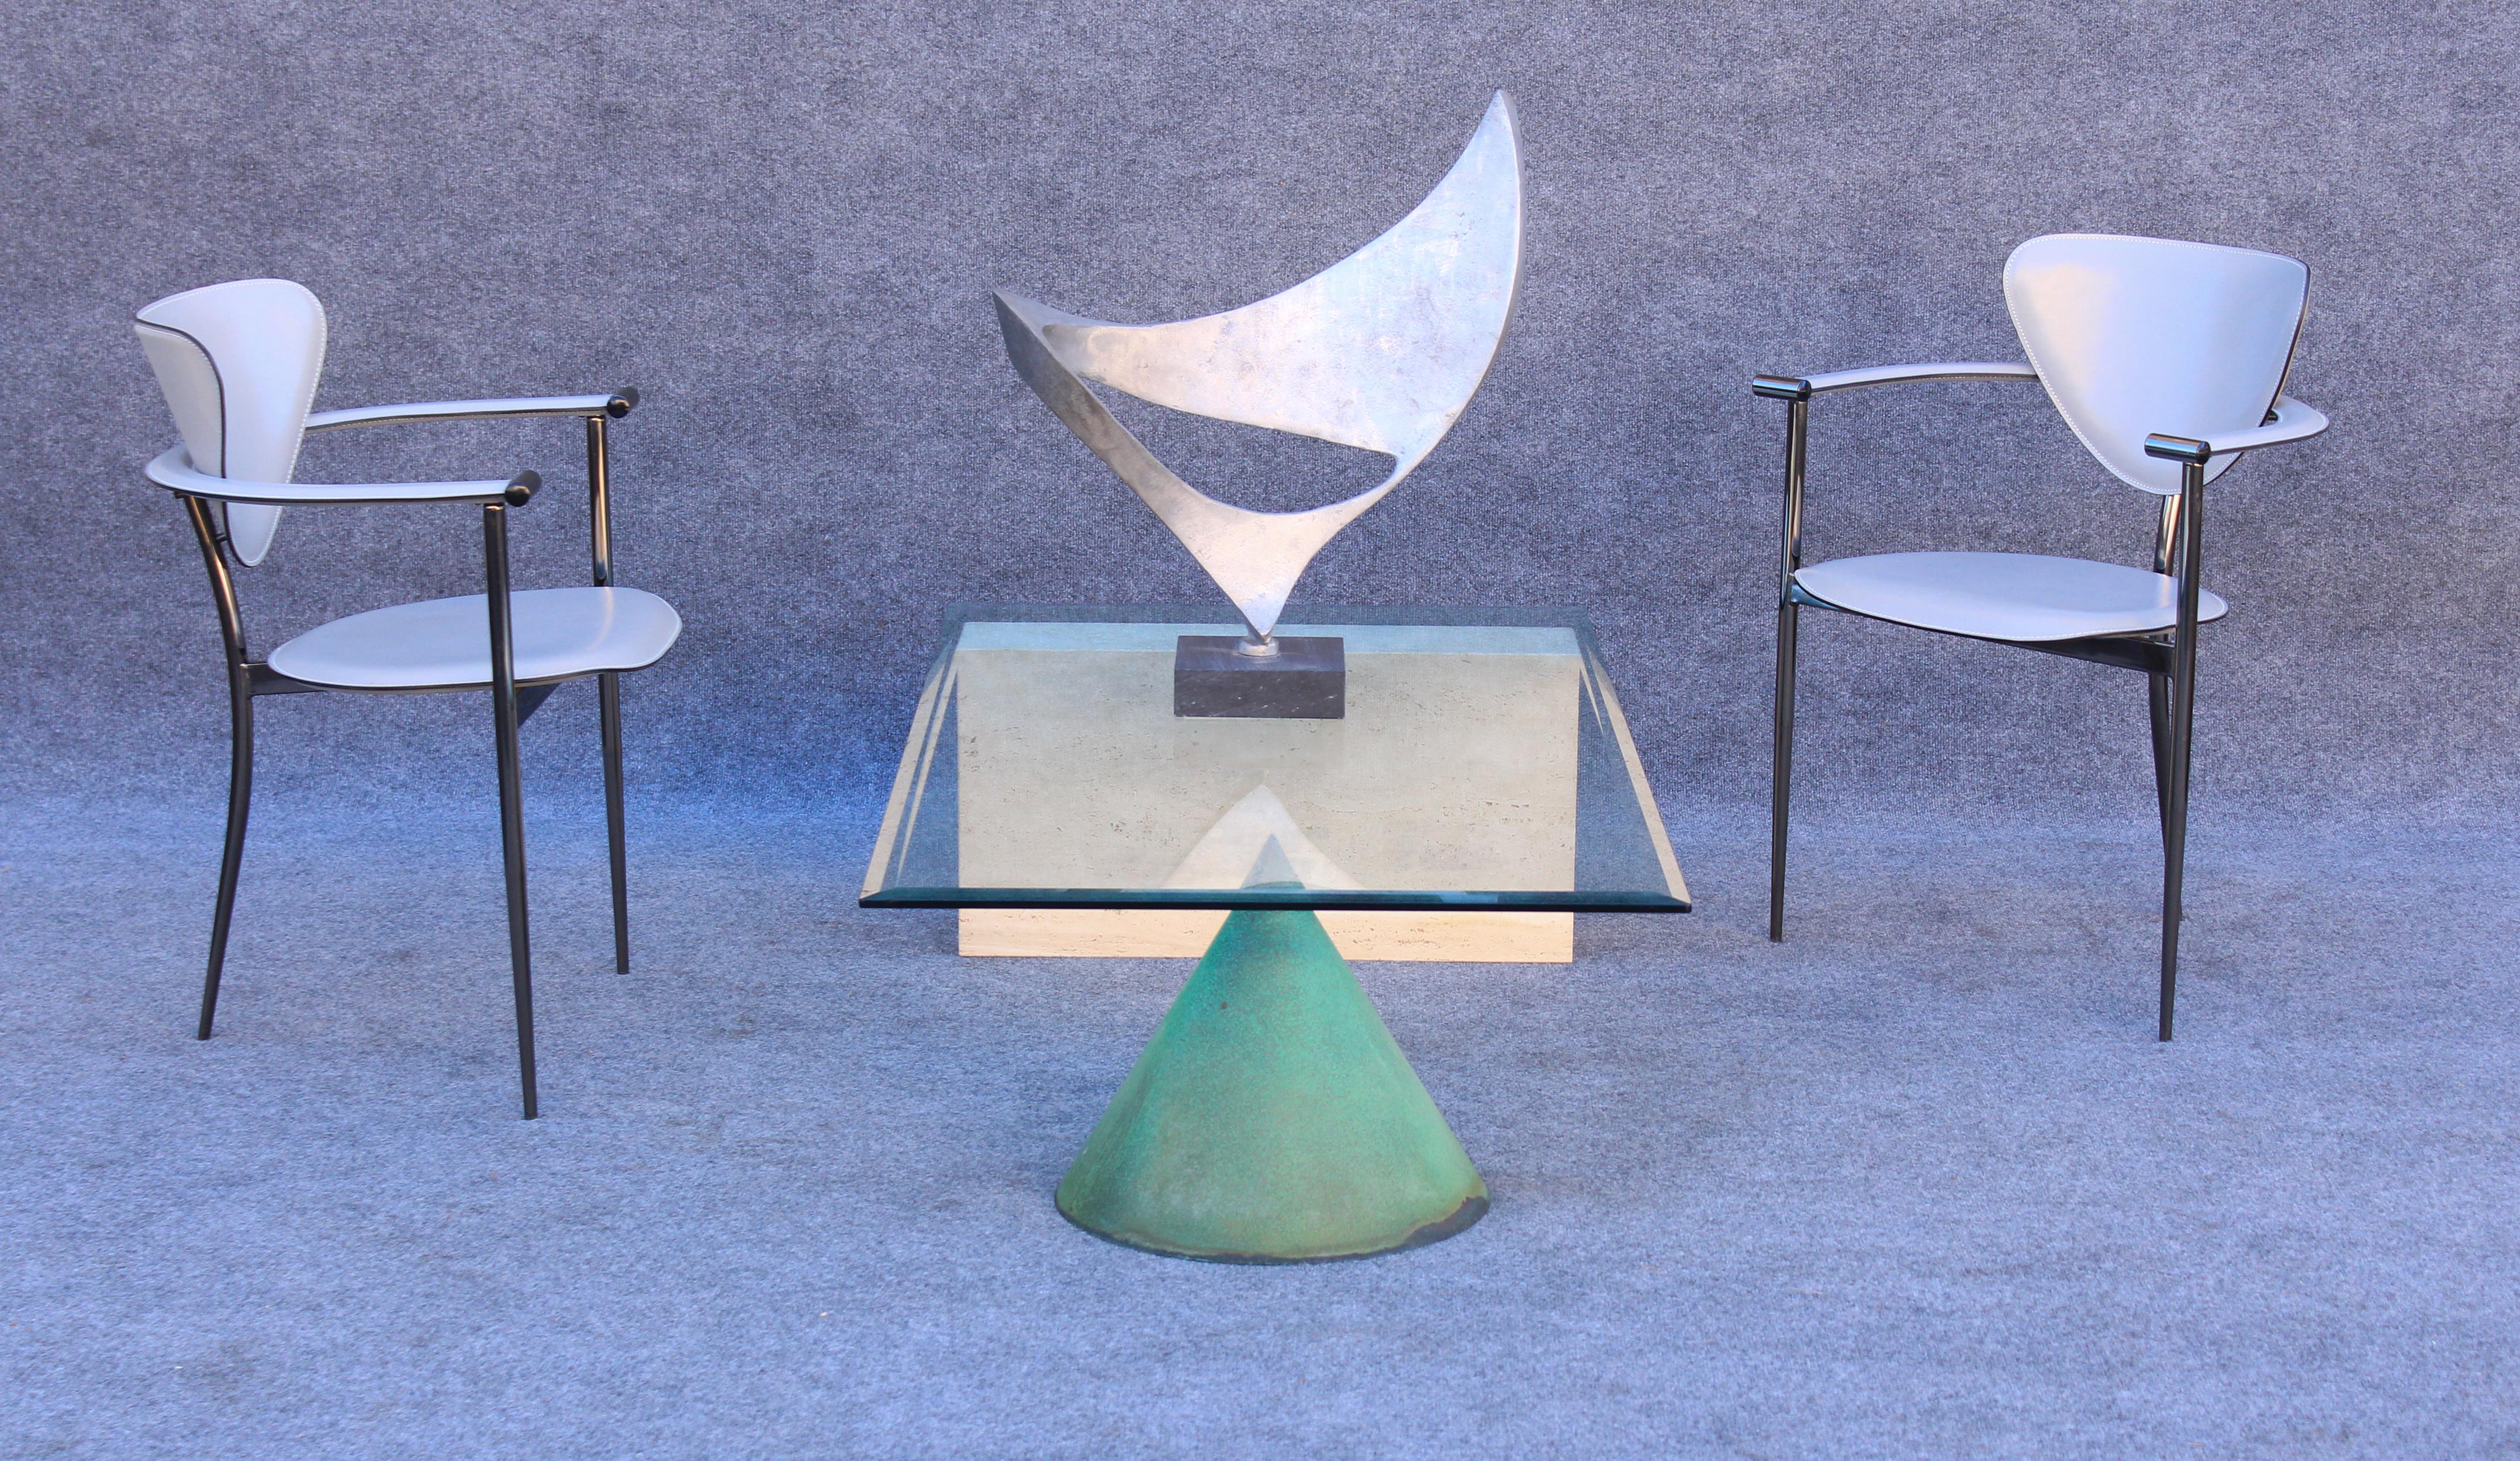 Designed by Italian architects Massimo & Lella Vignelli, this table was made in the 1970s by Casigliani. Different versions of this table are out there, but this particular model is called the 'Kona' and is made of a metal cone and a single block of